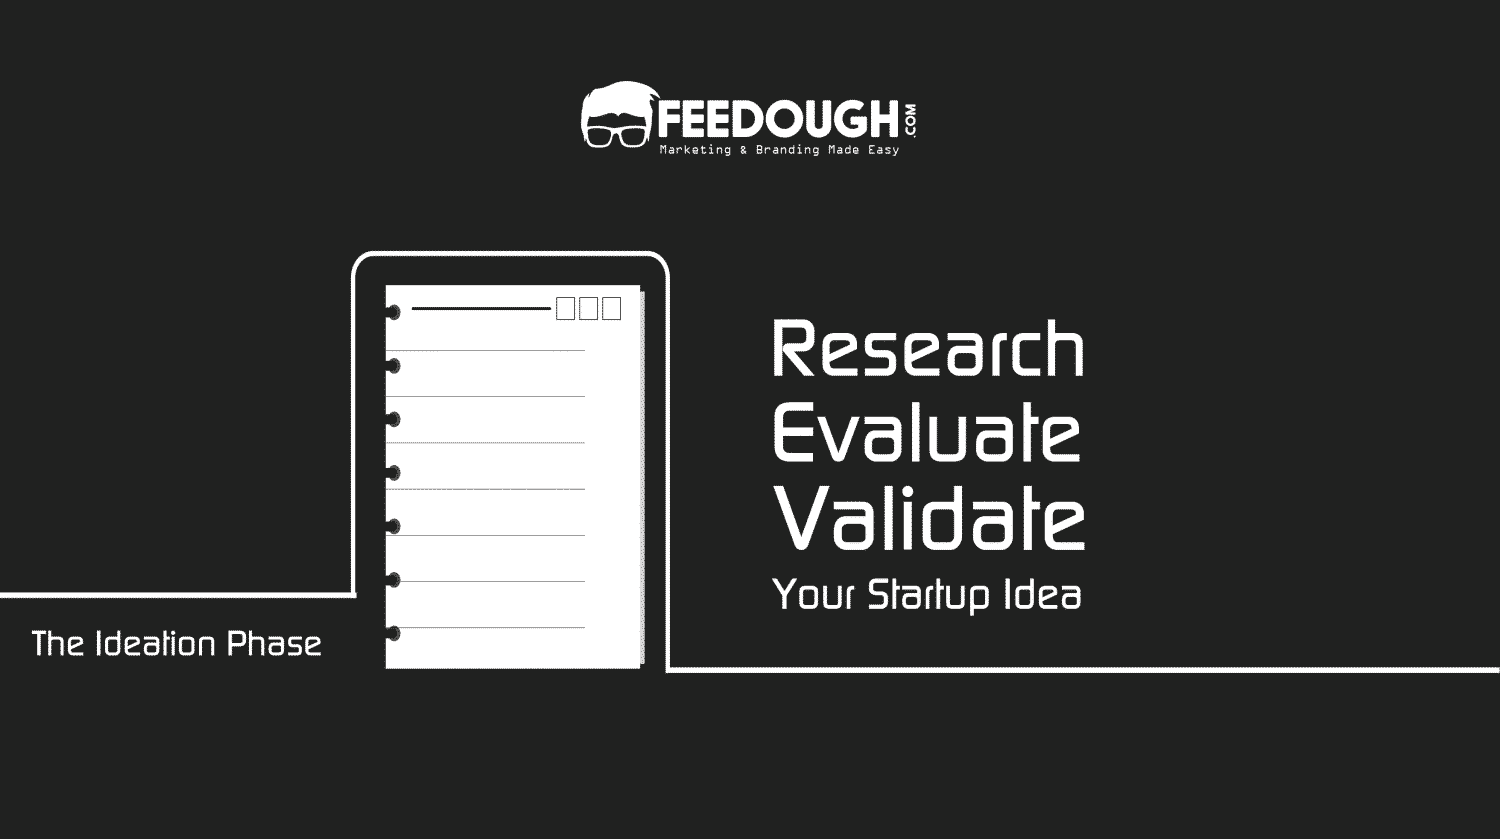 Research, Evaluate and Validate Your Startup Idea